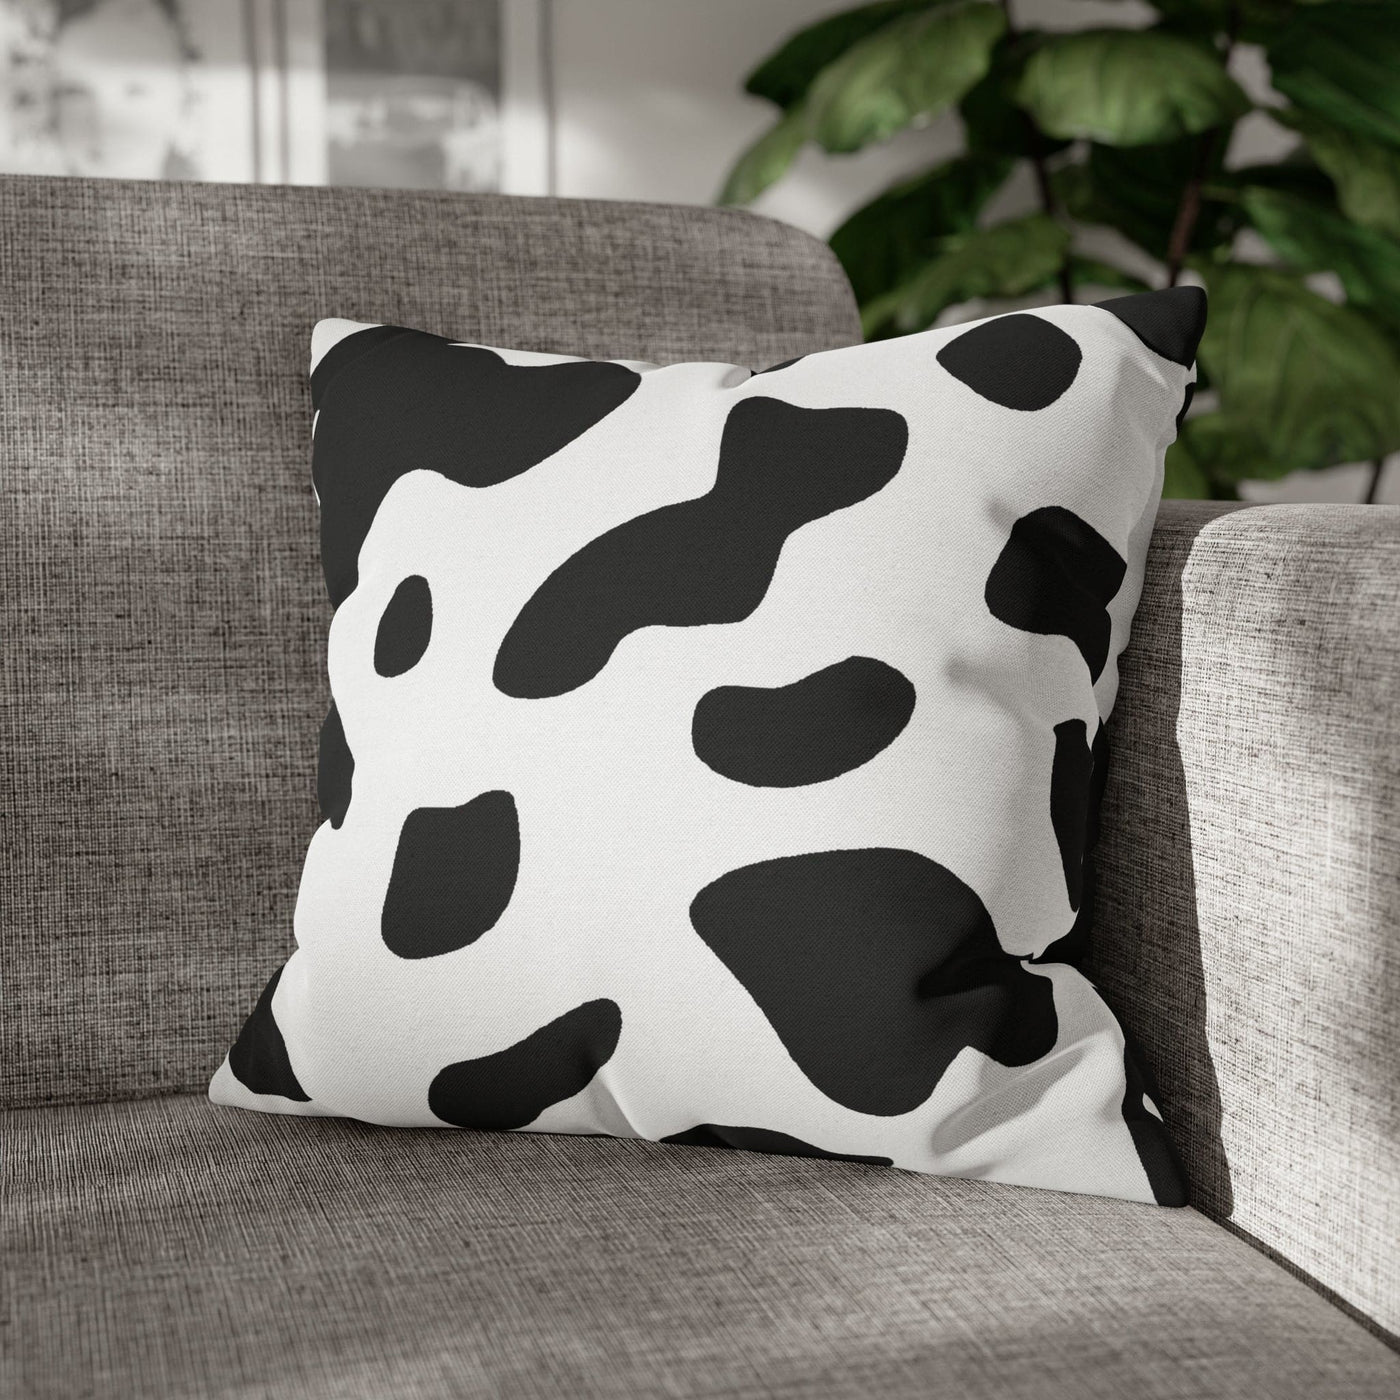 Decorative Throw Pillow Covers With Zipper - Set Of 2 Black And White Abstract